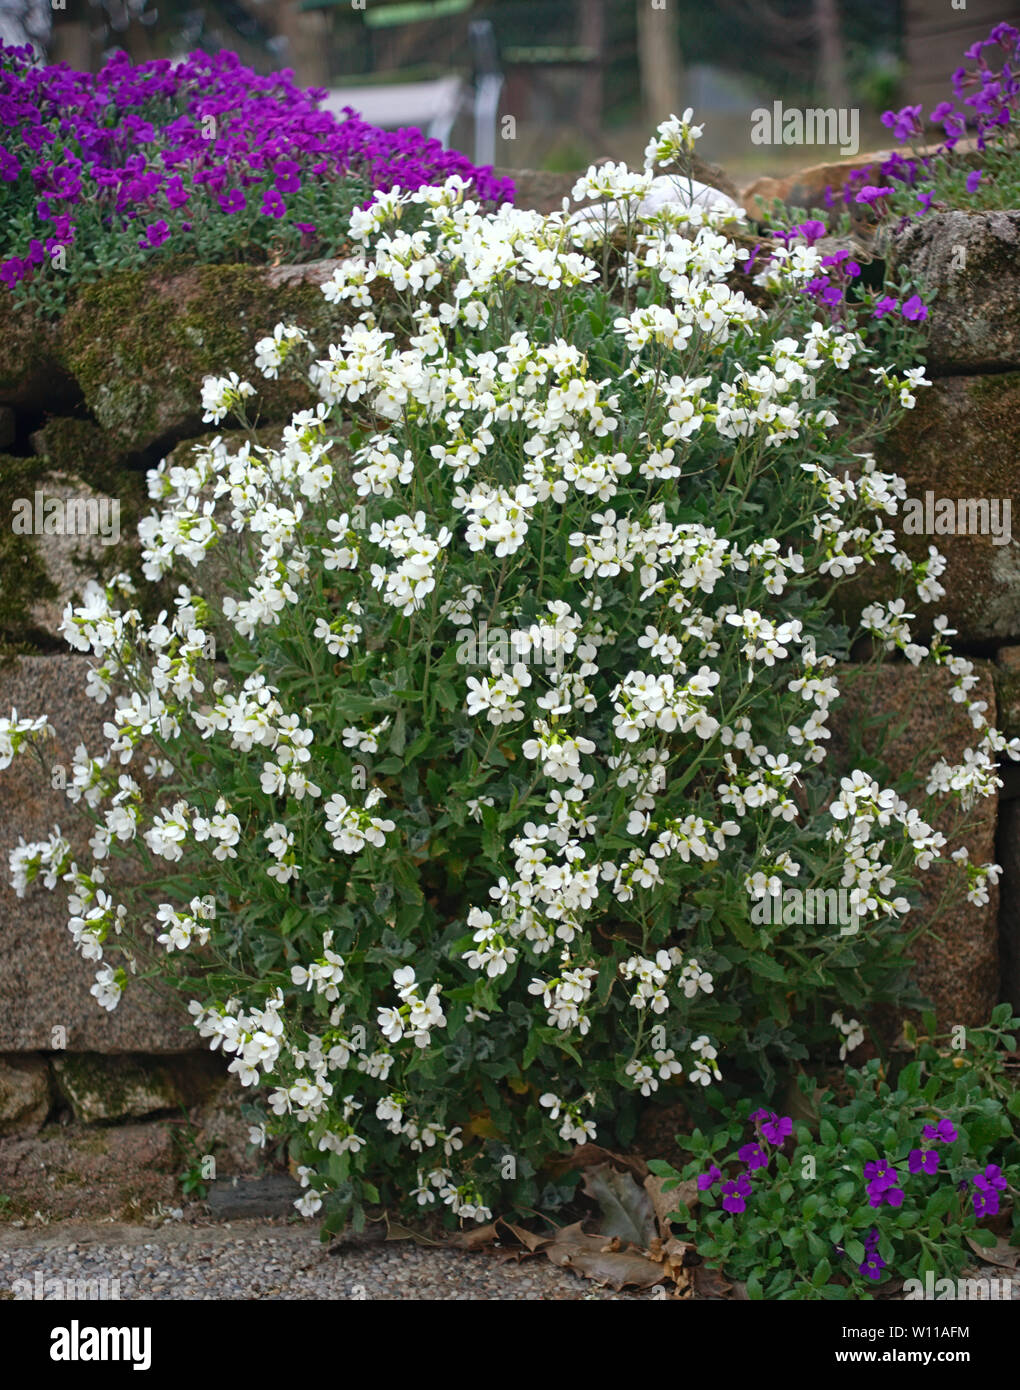 Plant blooming with small white flowers on stone wall Stock Photo